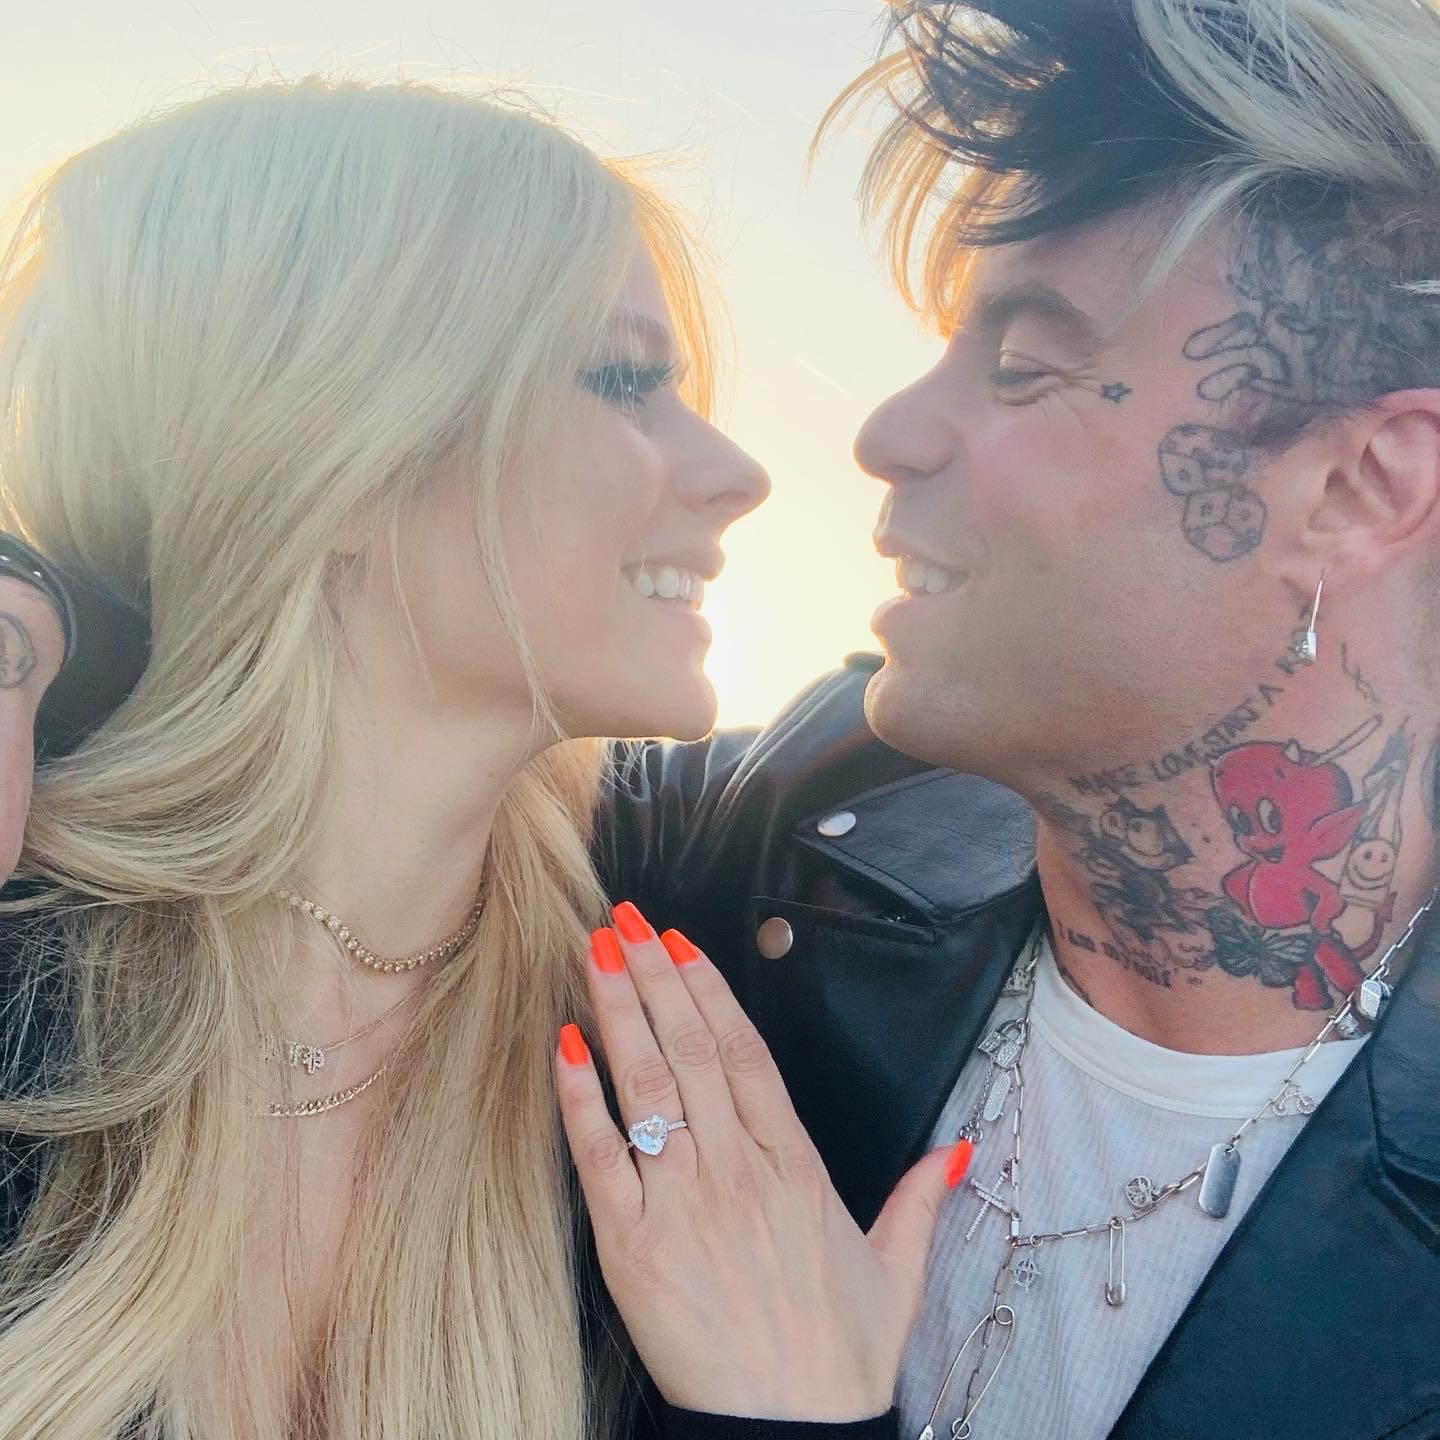 Avril Lavigne Mod Sun Paris Proposal Moment with Heart Shaped Diamond Ring on Hand